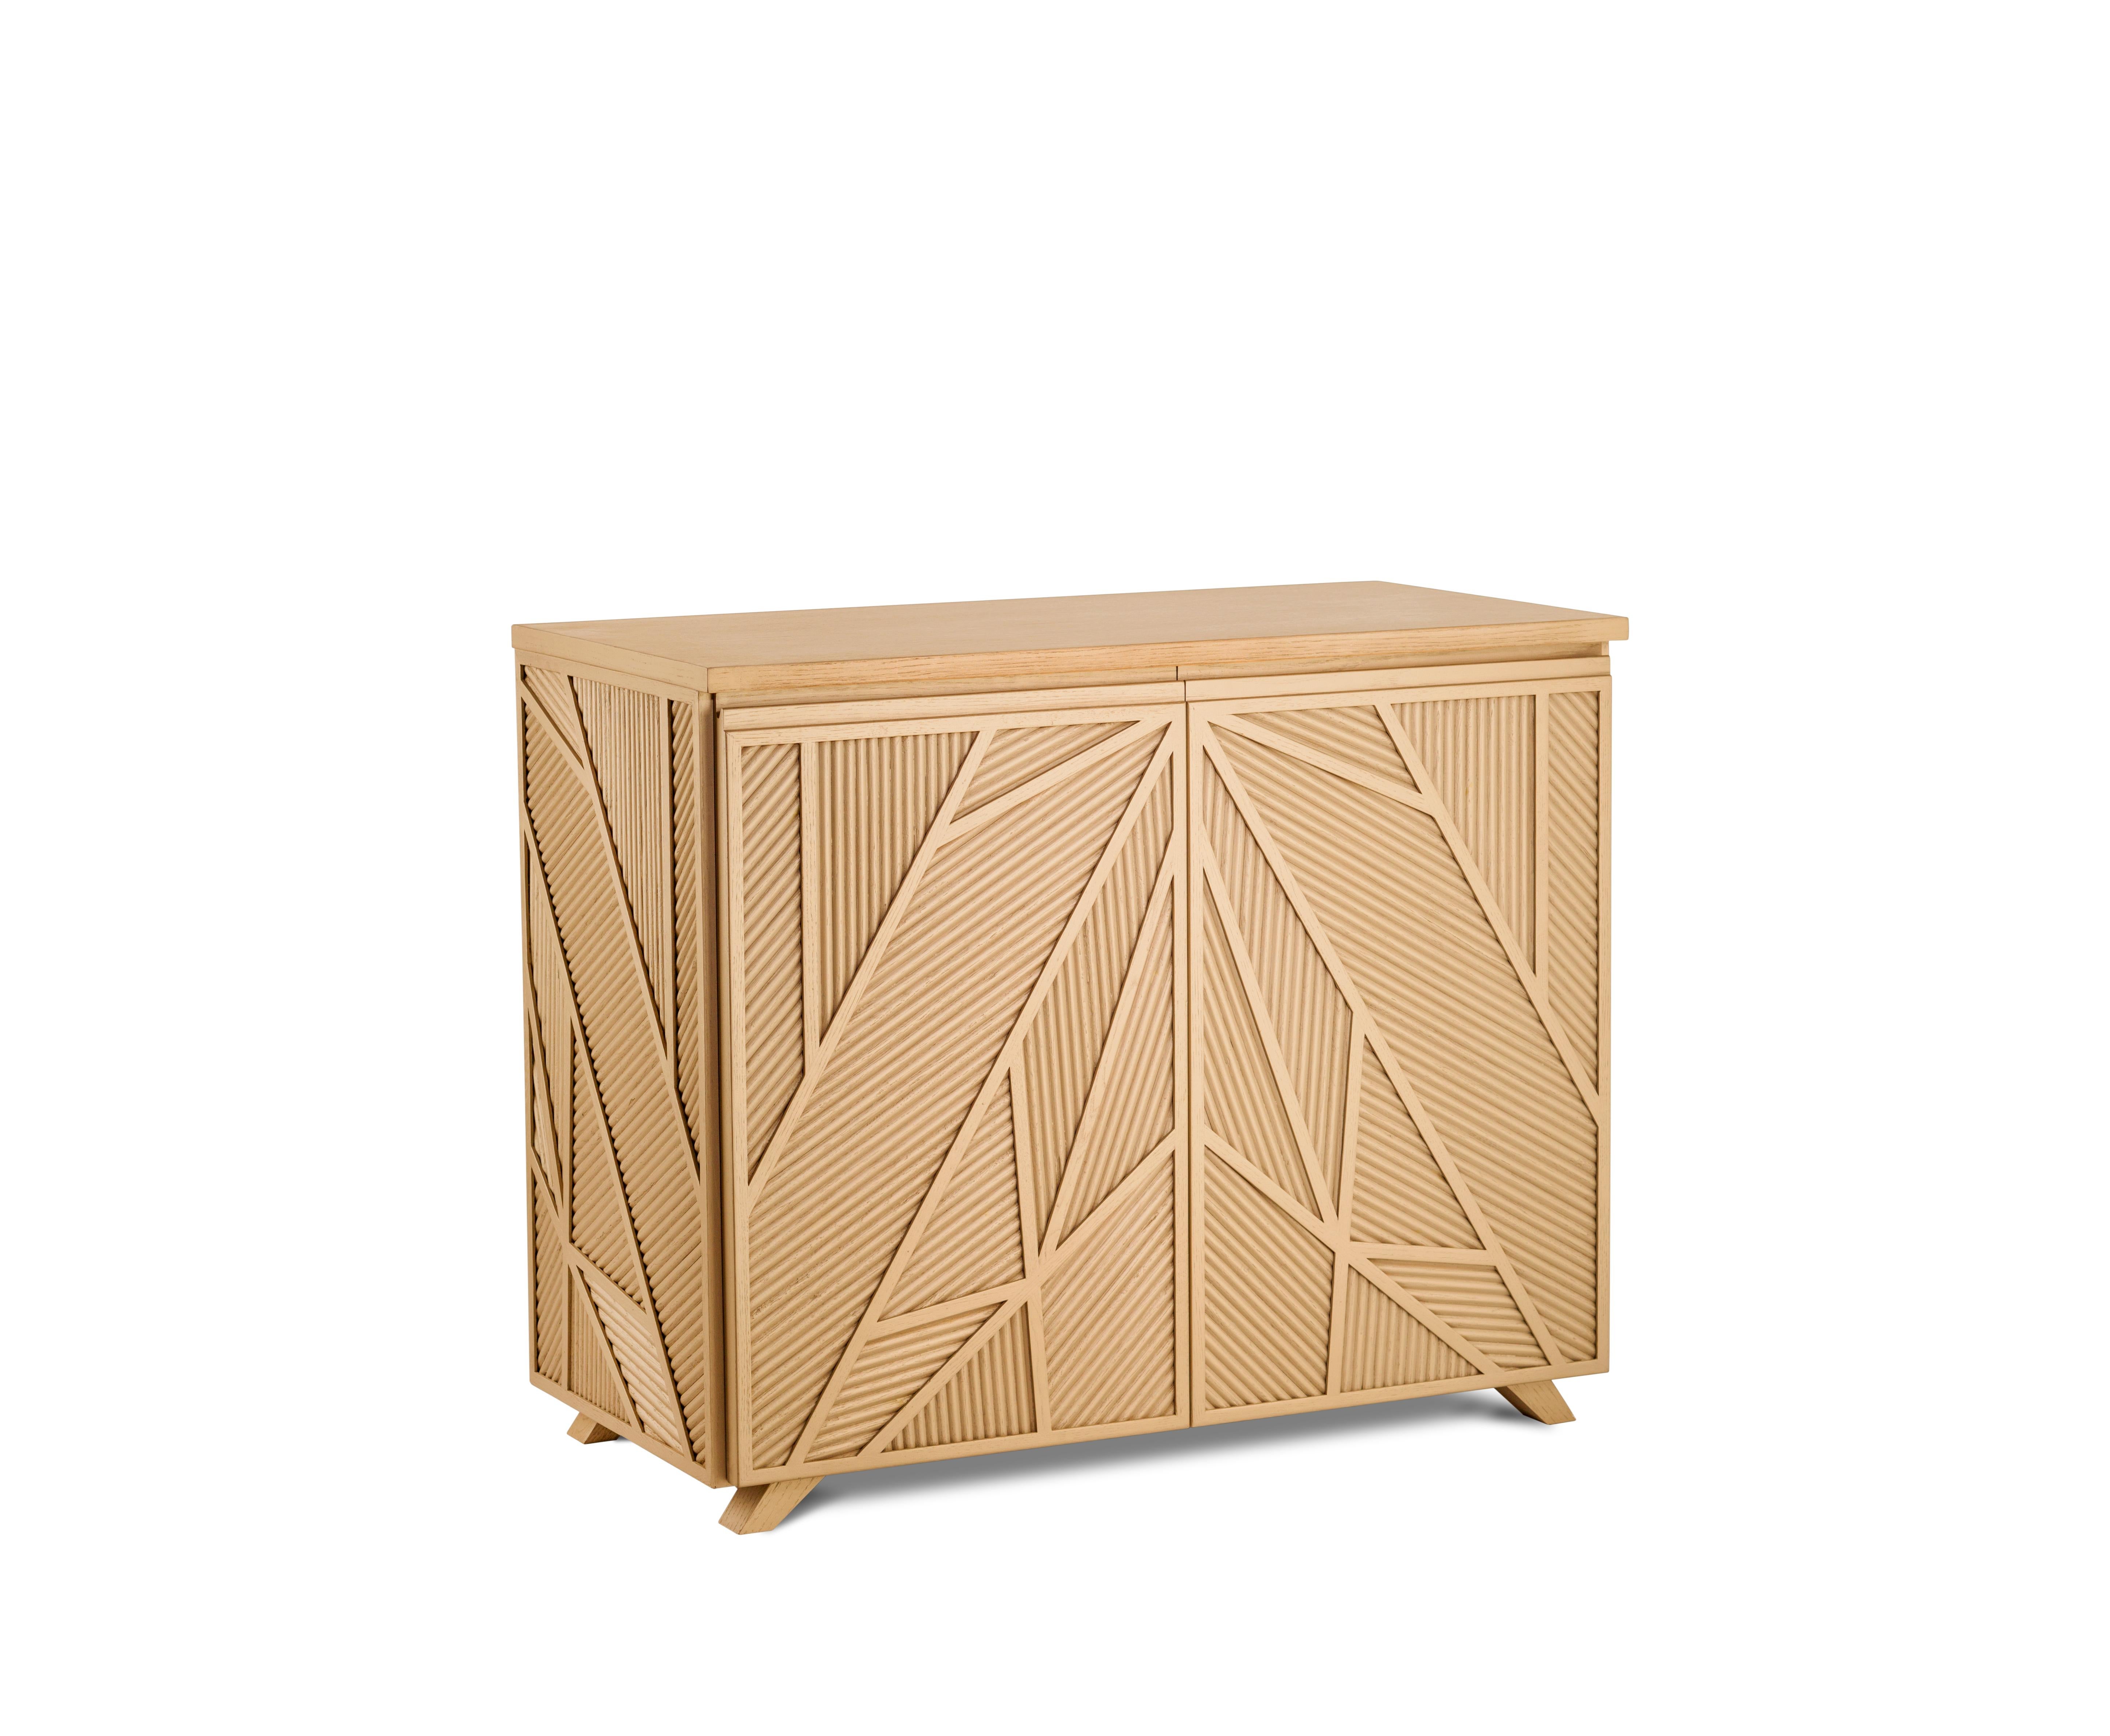 Egyptian Geometric Oak Sticks Cabinet Inspired from Ancient Egypt Use of Palm Branches For Sale